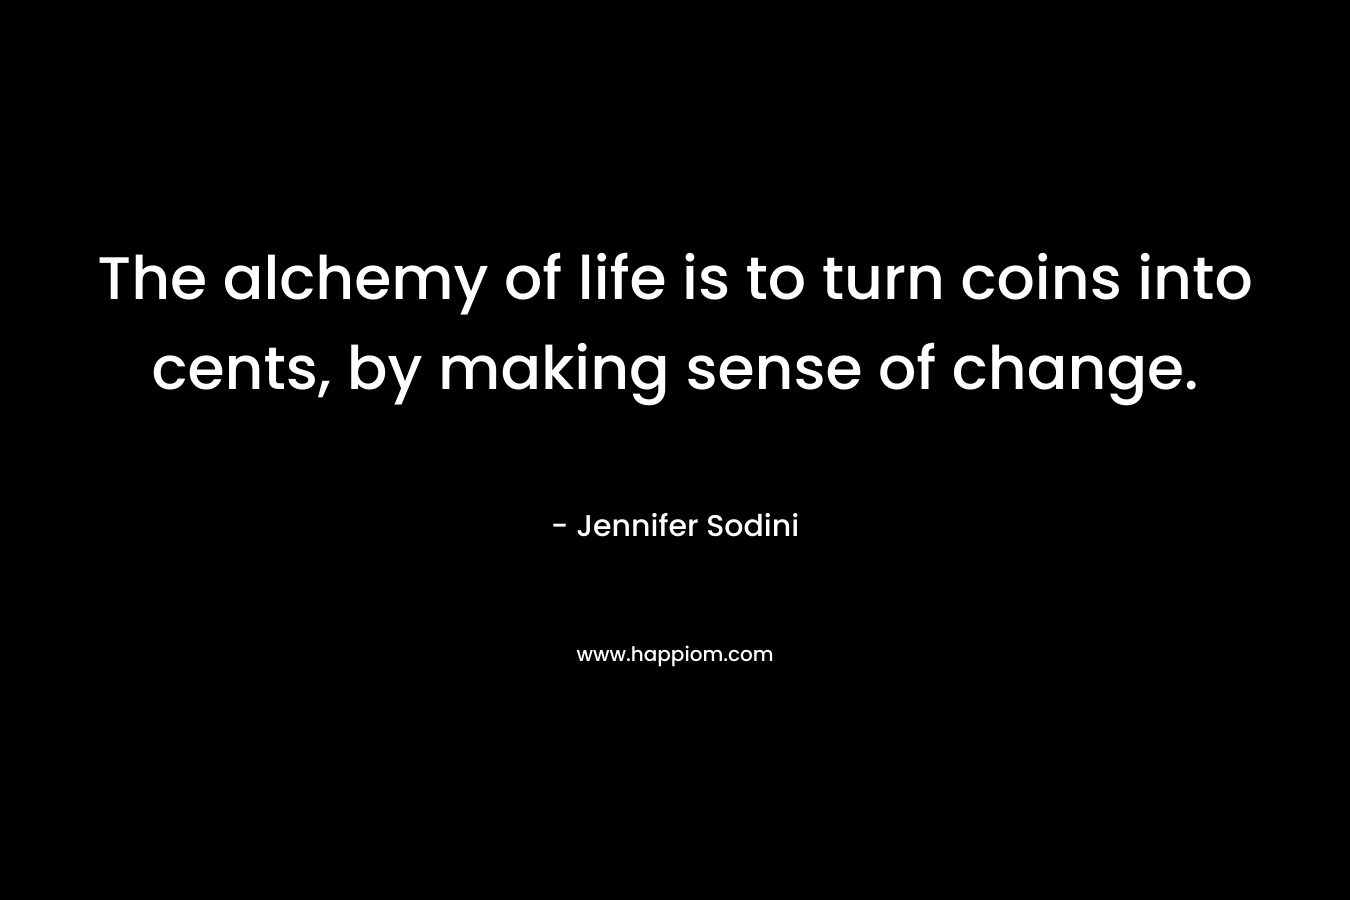 The alchemy of life is to turn coins into cents, by making sense of change. – Jennifer Sodini